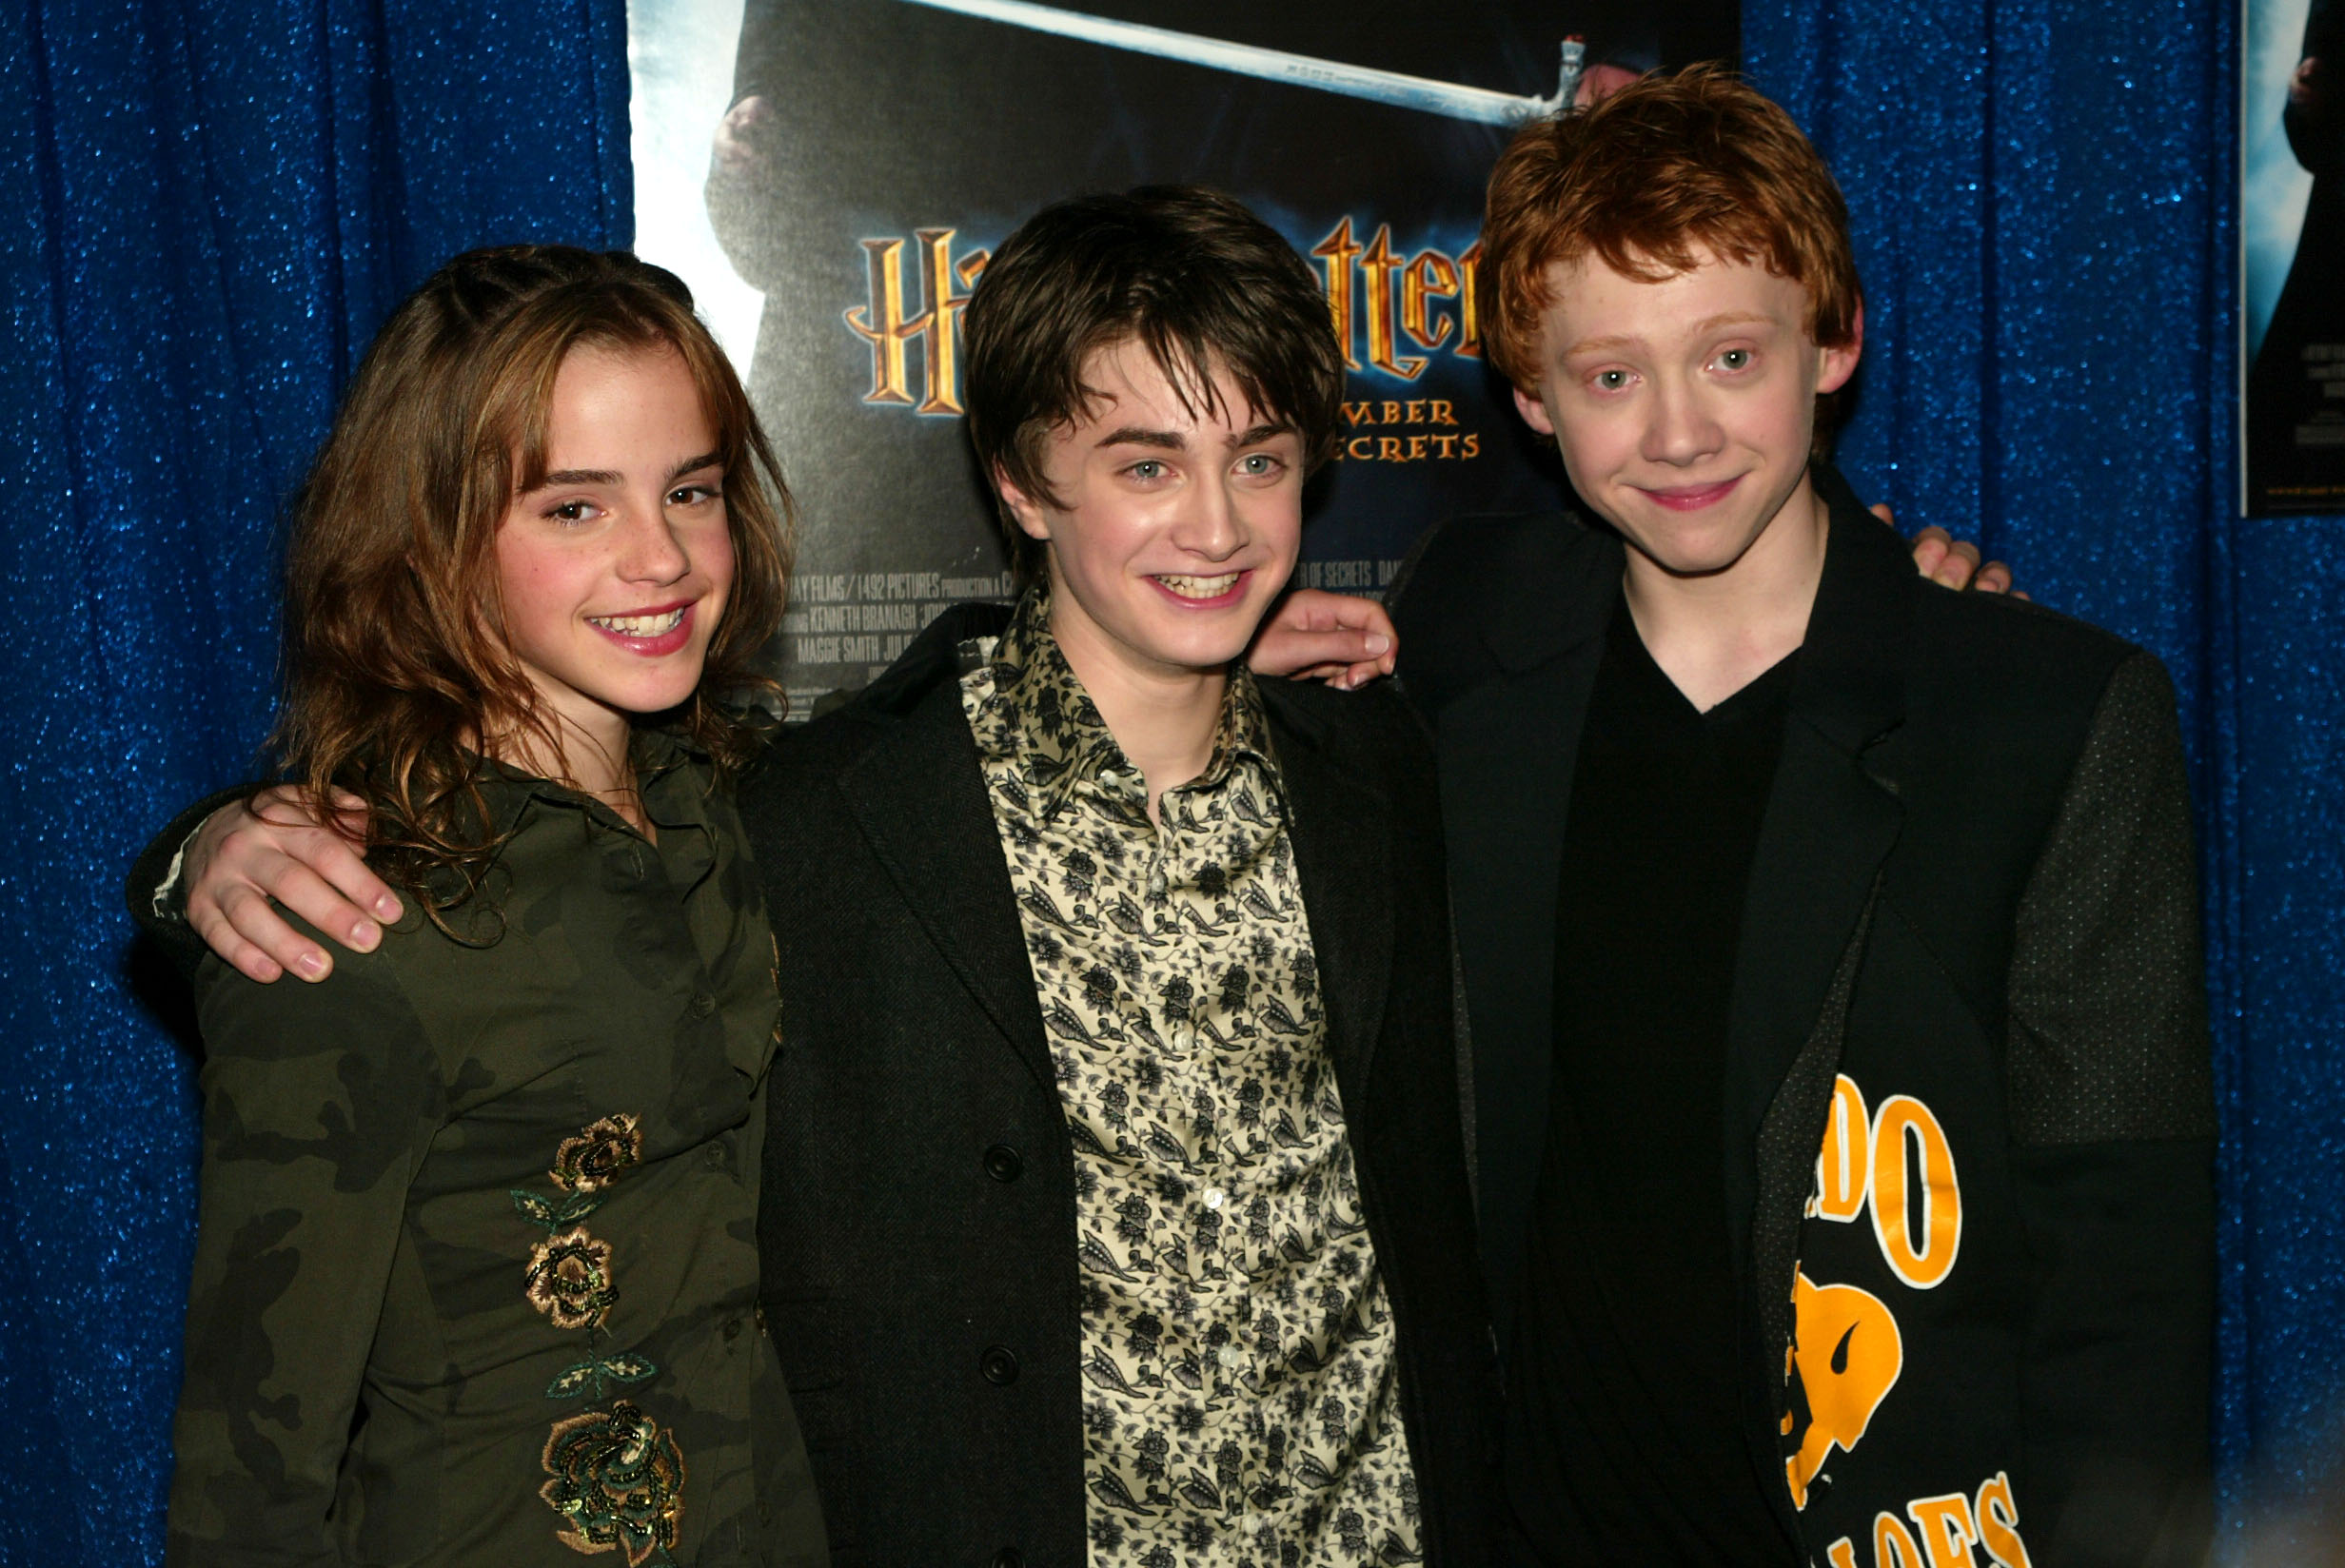 Emma Watson, Daniel Radcliffe, and Rupert Grint at the New York premiere of "Harry Potter and the Chamber of Secrets" in New York City on November 10, 2002 | Source: Getty Images